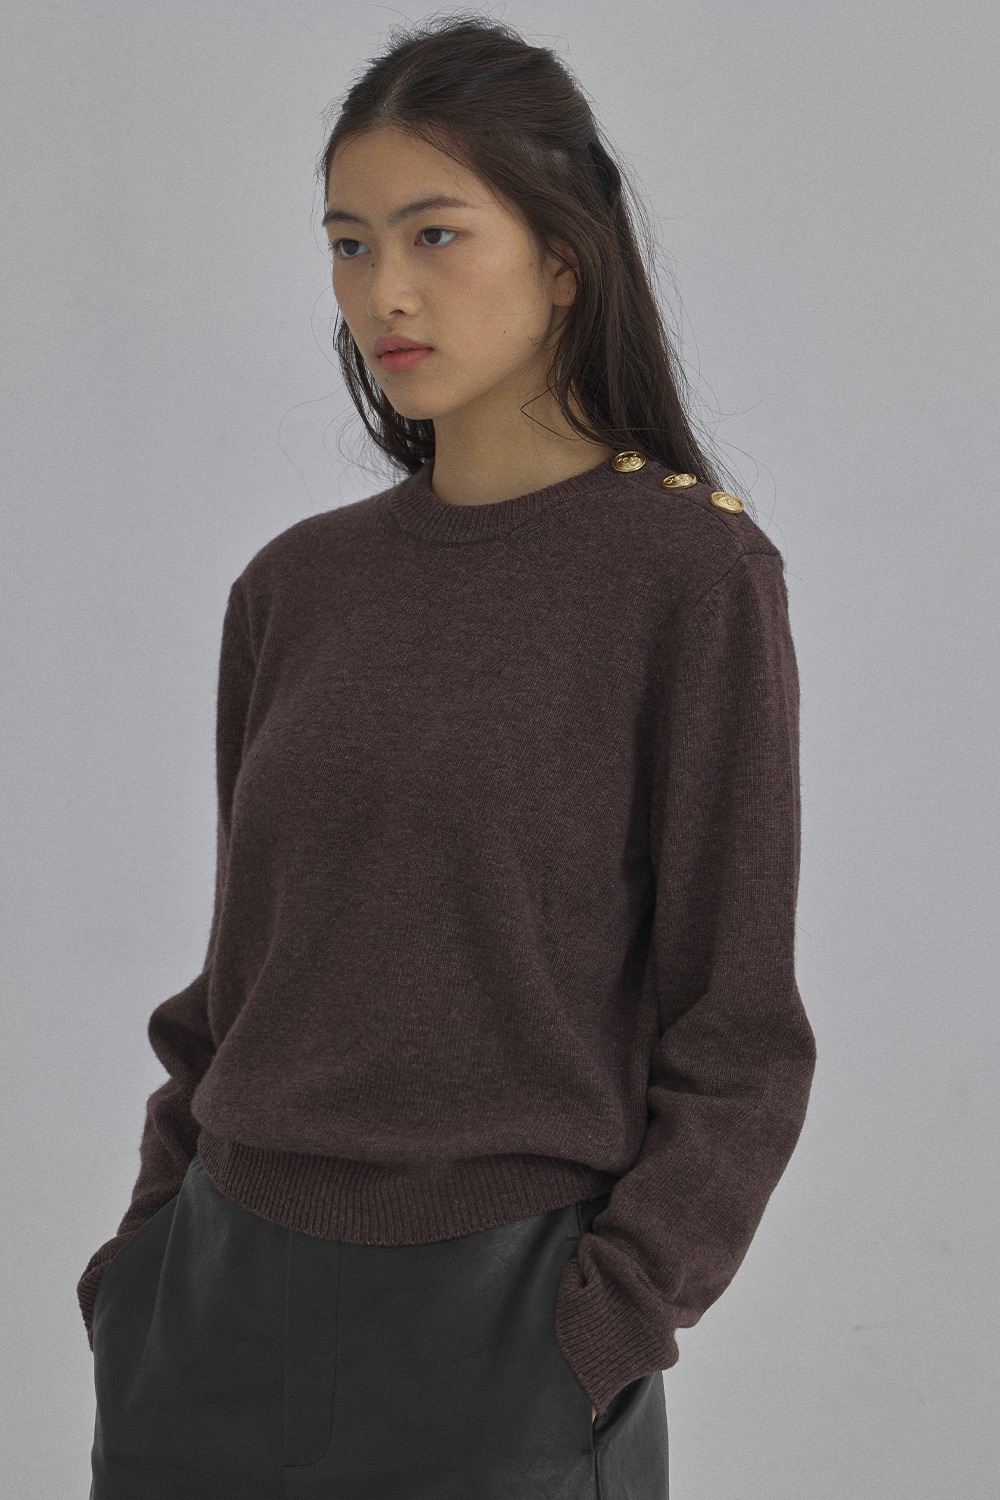 Shoulder Gold Accentuated Knitwear